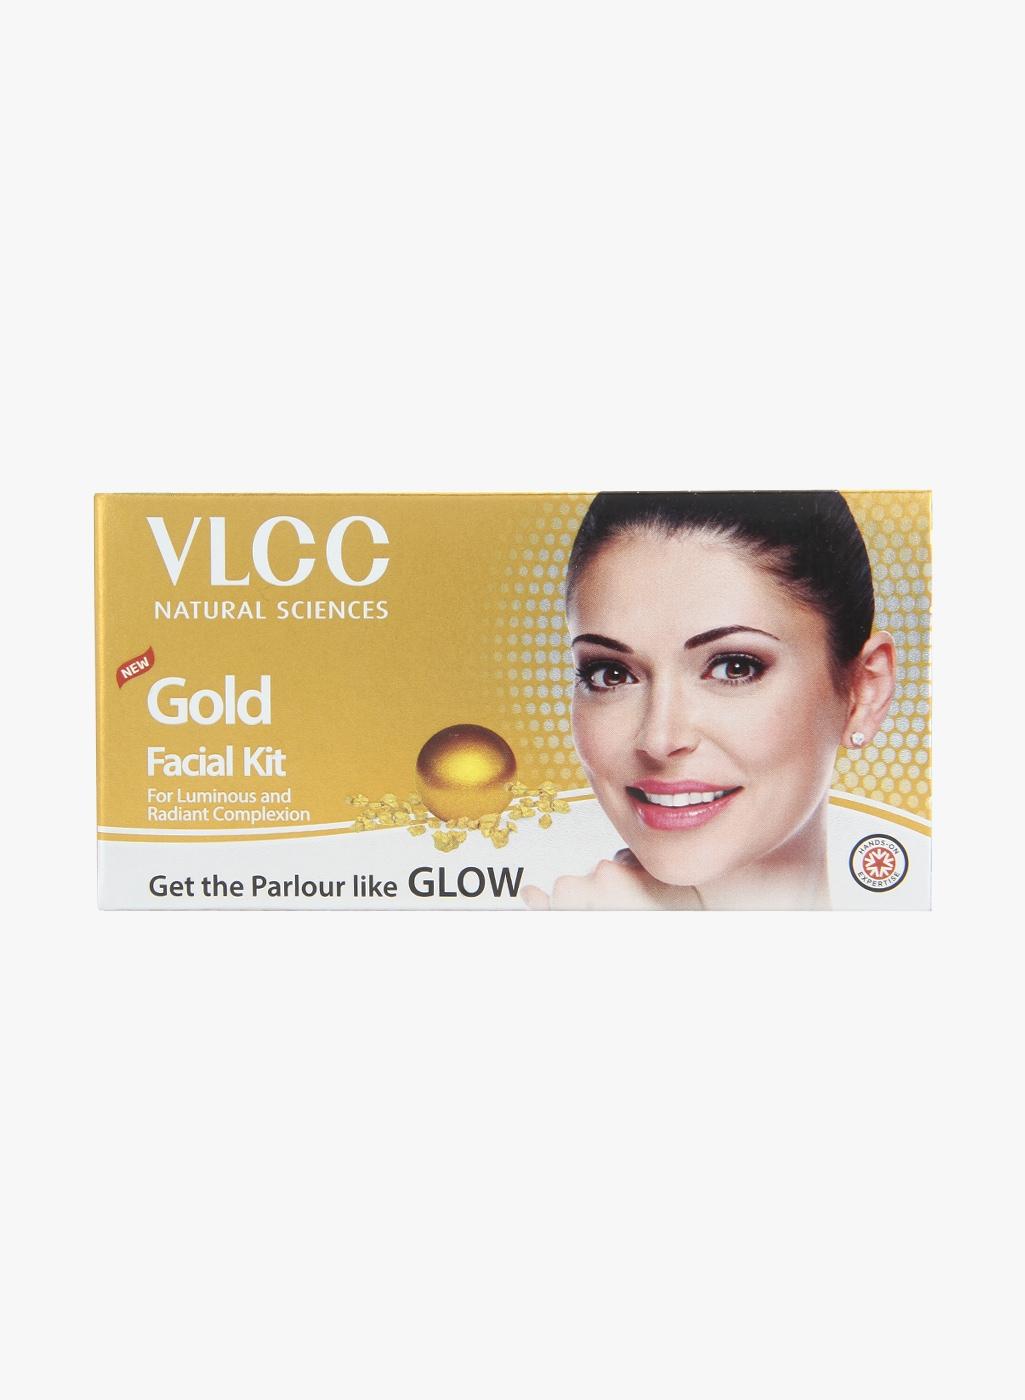 vlcc-gold-facial-kit-for-luminous-&-radiant-complexion